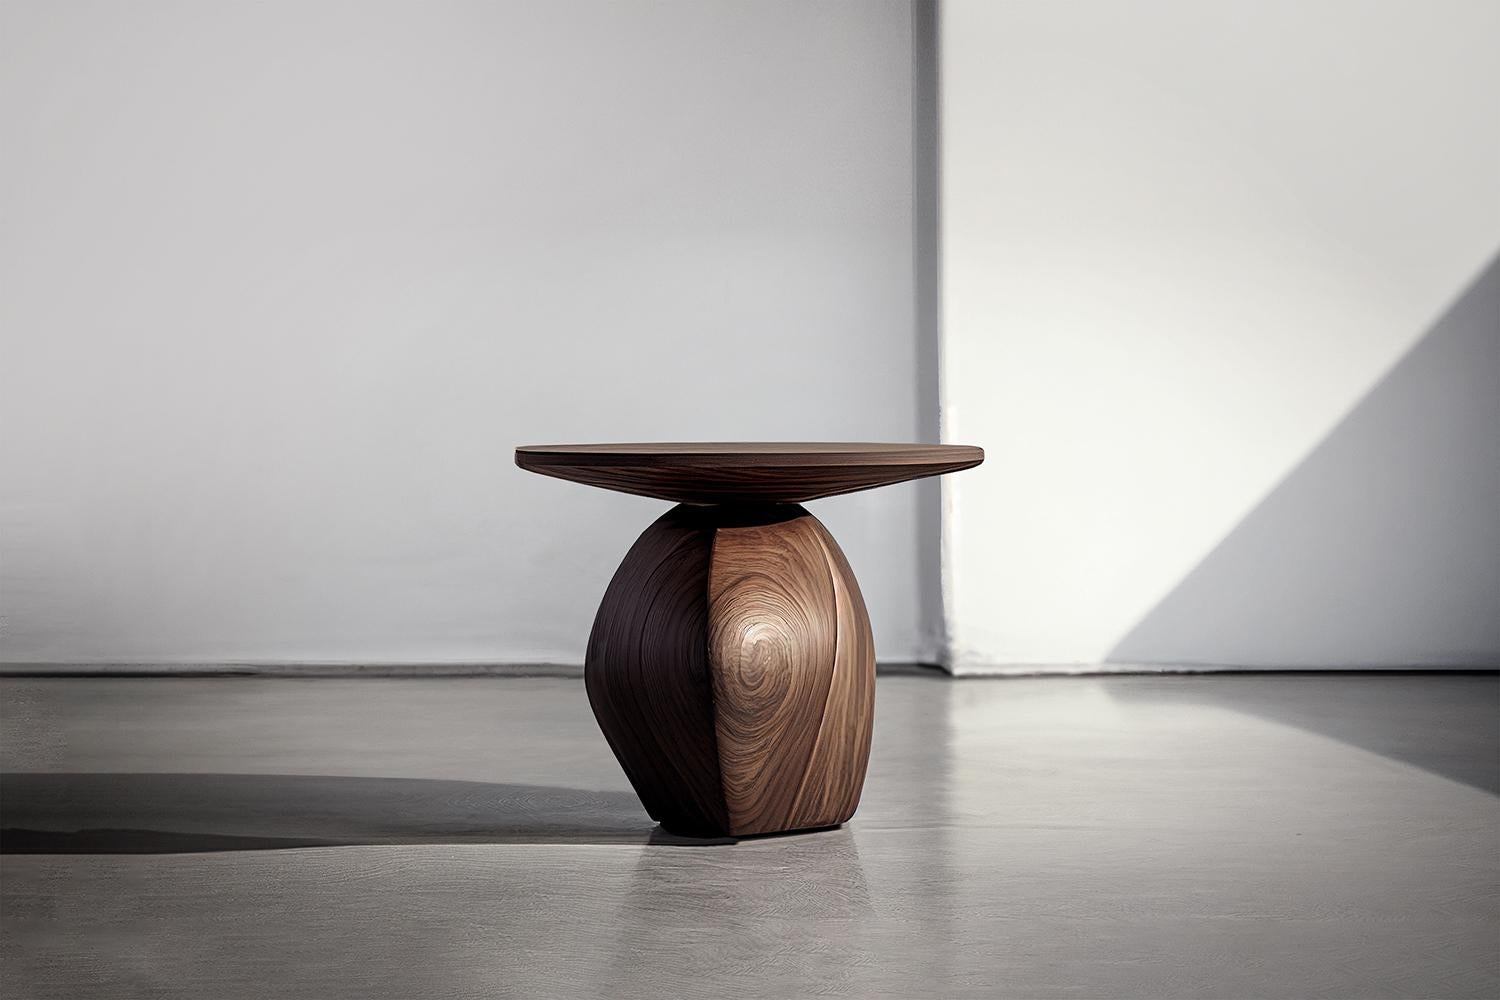 Sculptural side table made of solid walnut wood, nightstand, auxiliary table solace S2 by Joel Escalona

The Solace side table series, designed by Joel Escalona, is a furniture collection that exudes balance and presence, thanks to its sensuous,